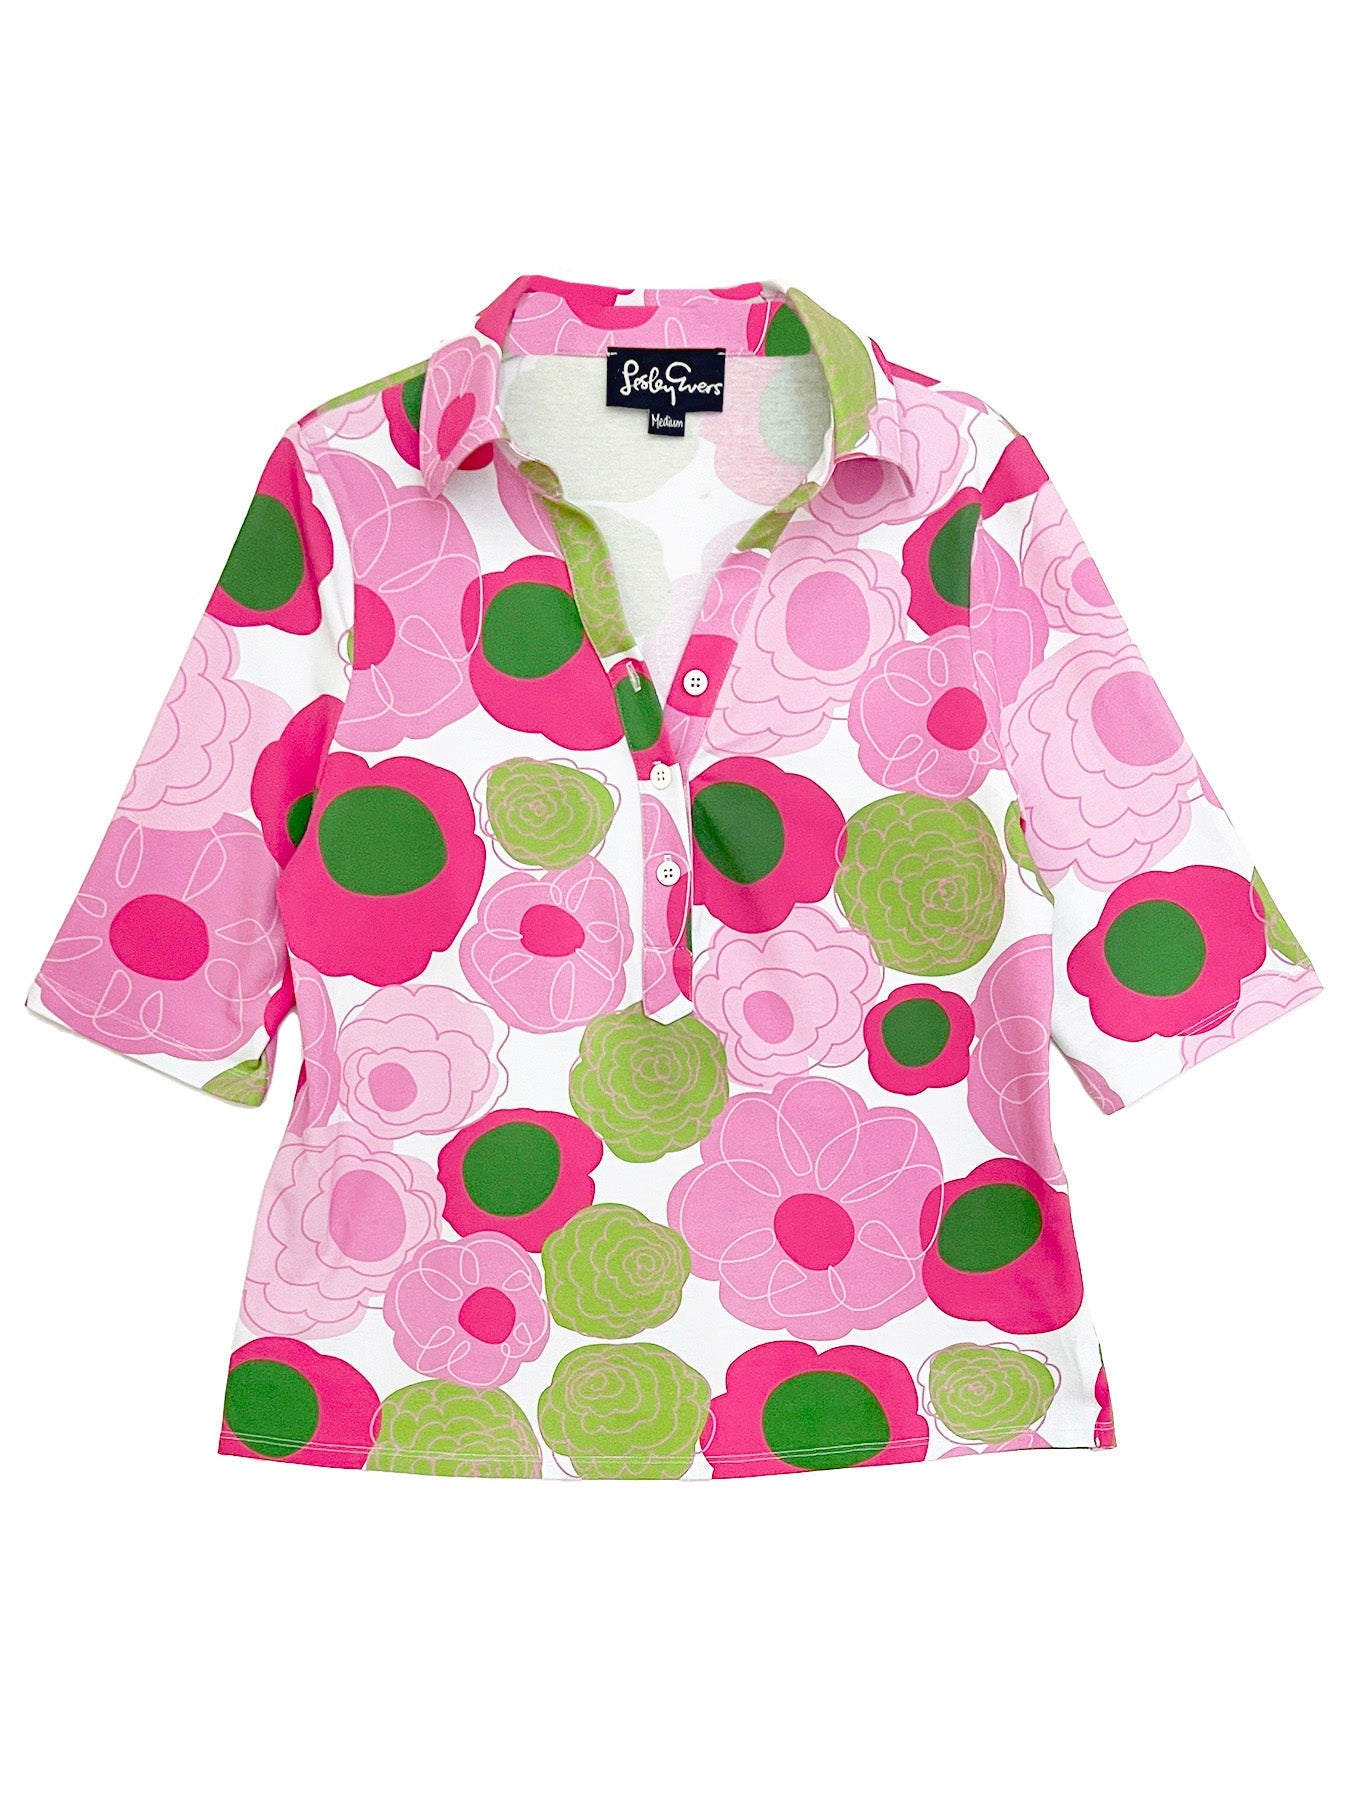 KIMMY top Flower Charm Pink - Lesley Evers-Button Top-clothing-colorful